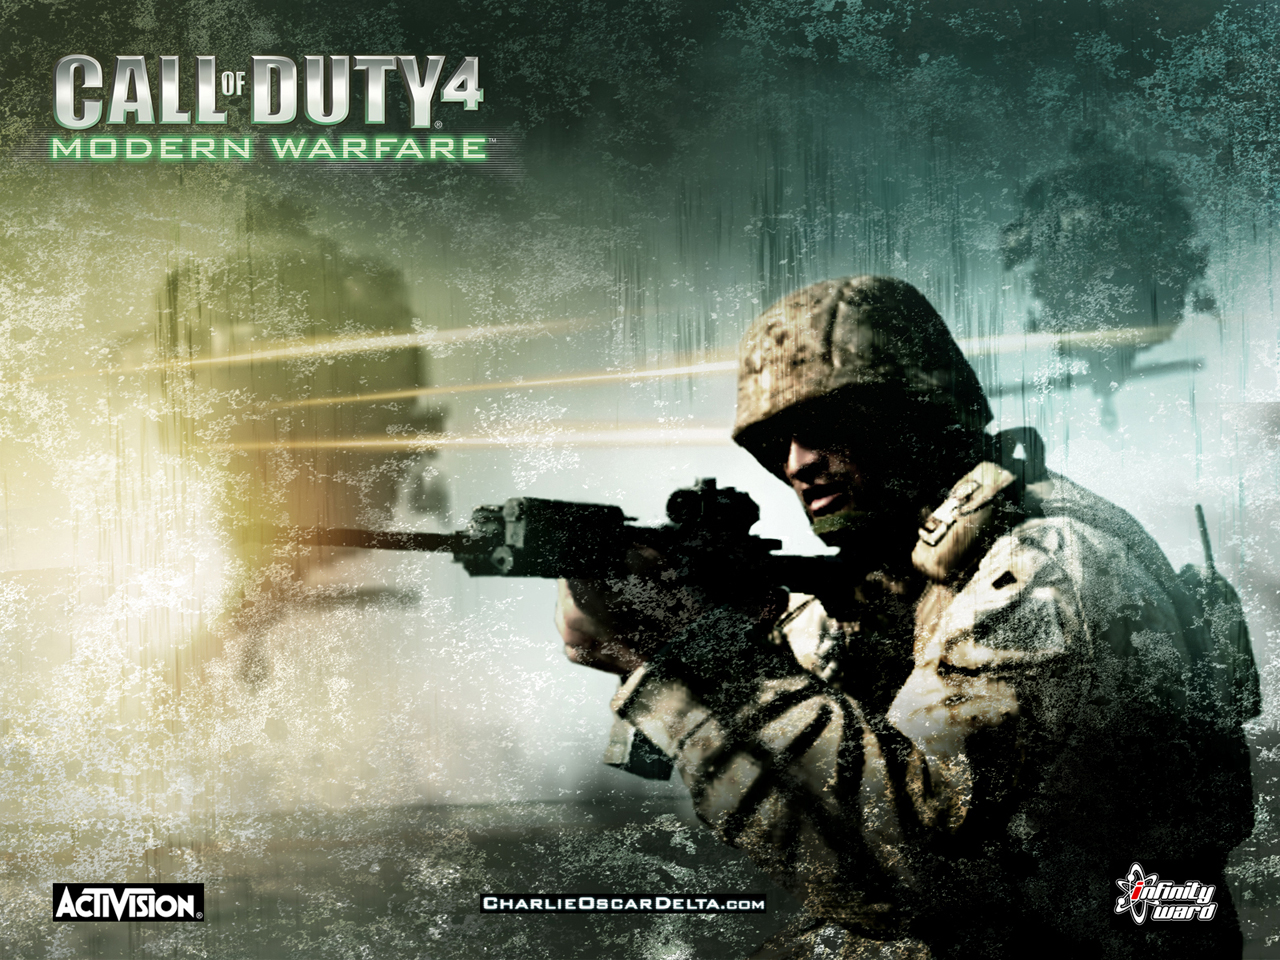 Here Are Some Wallpaper From Call Of Duty Click Each One To